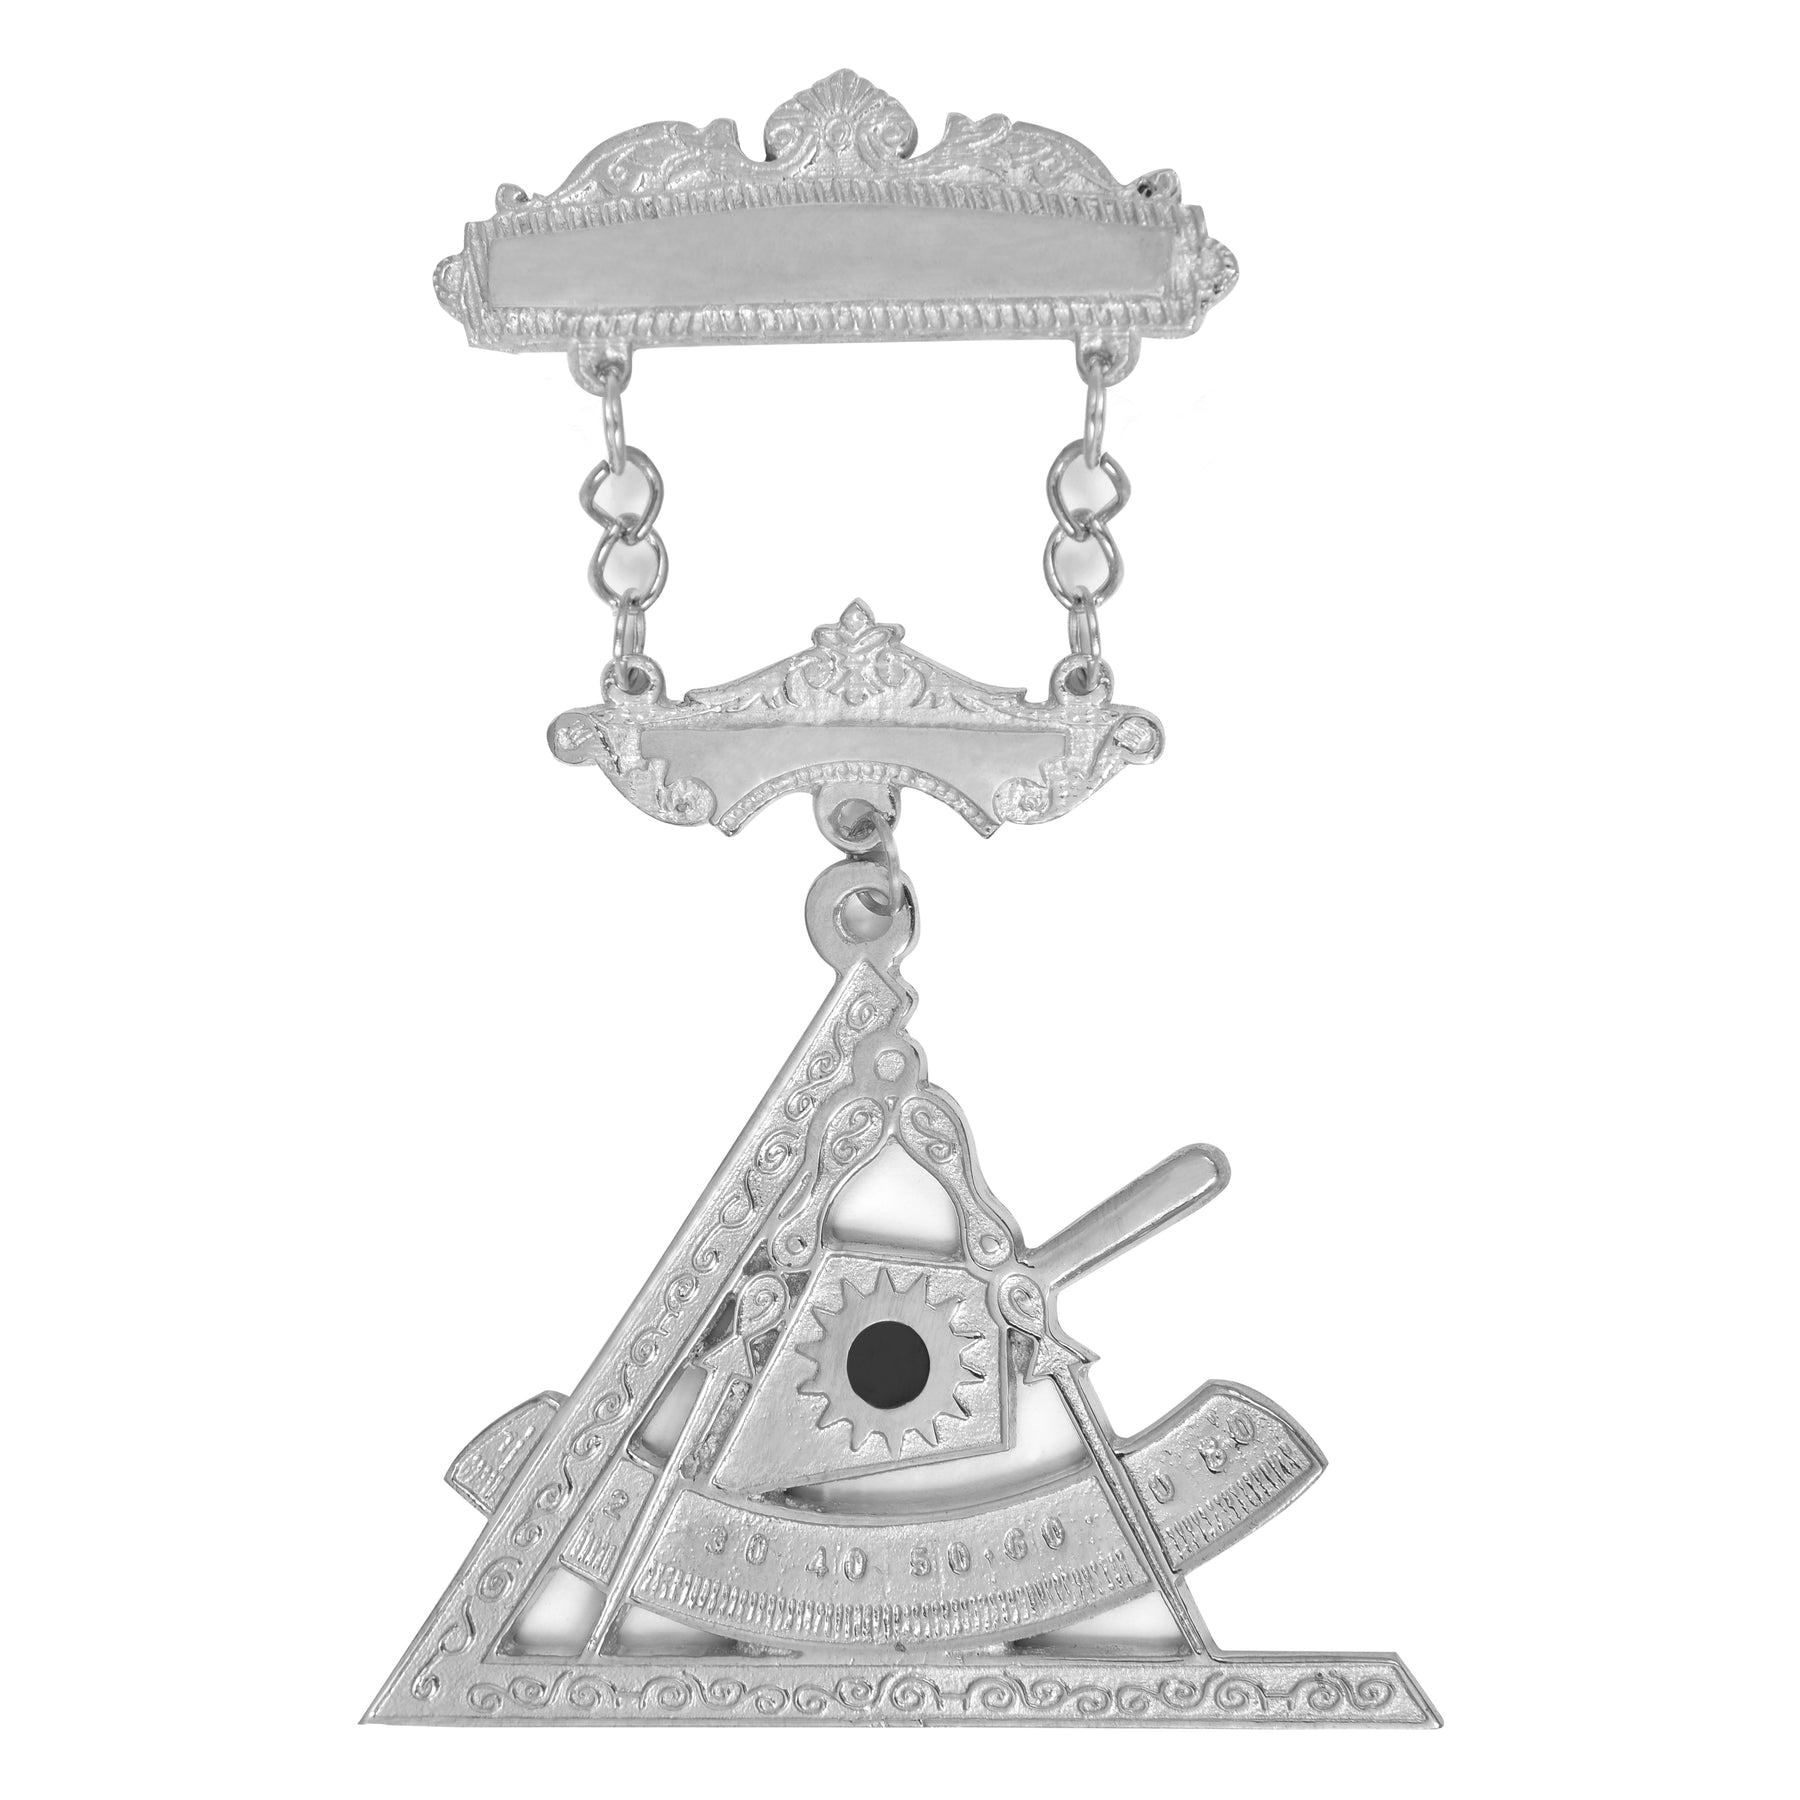 Past Illustrious Master Council Breast Jewel - Silver With Engravable Bar - Bricks Masons